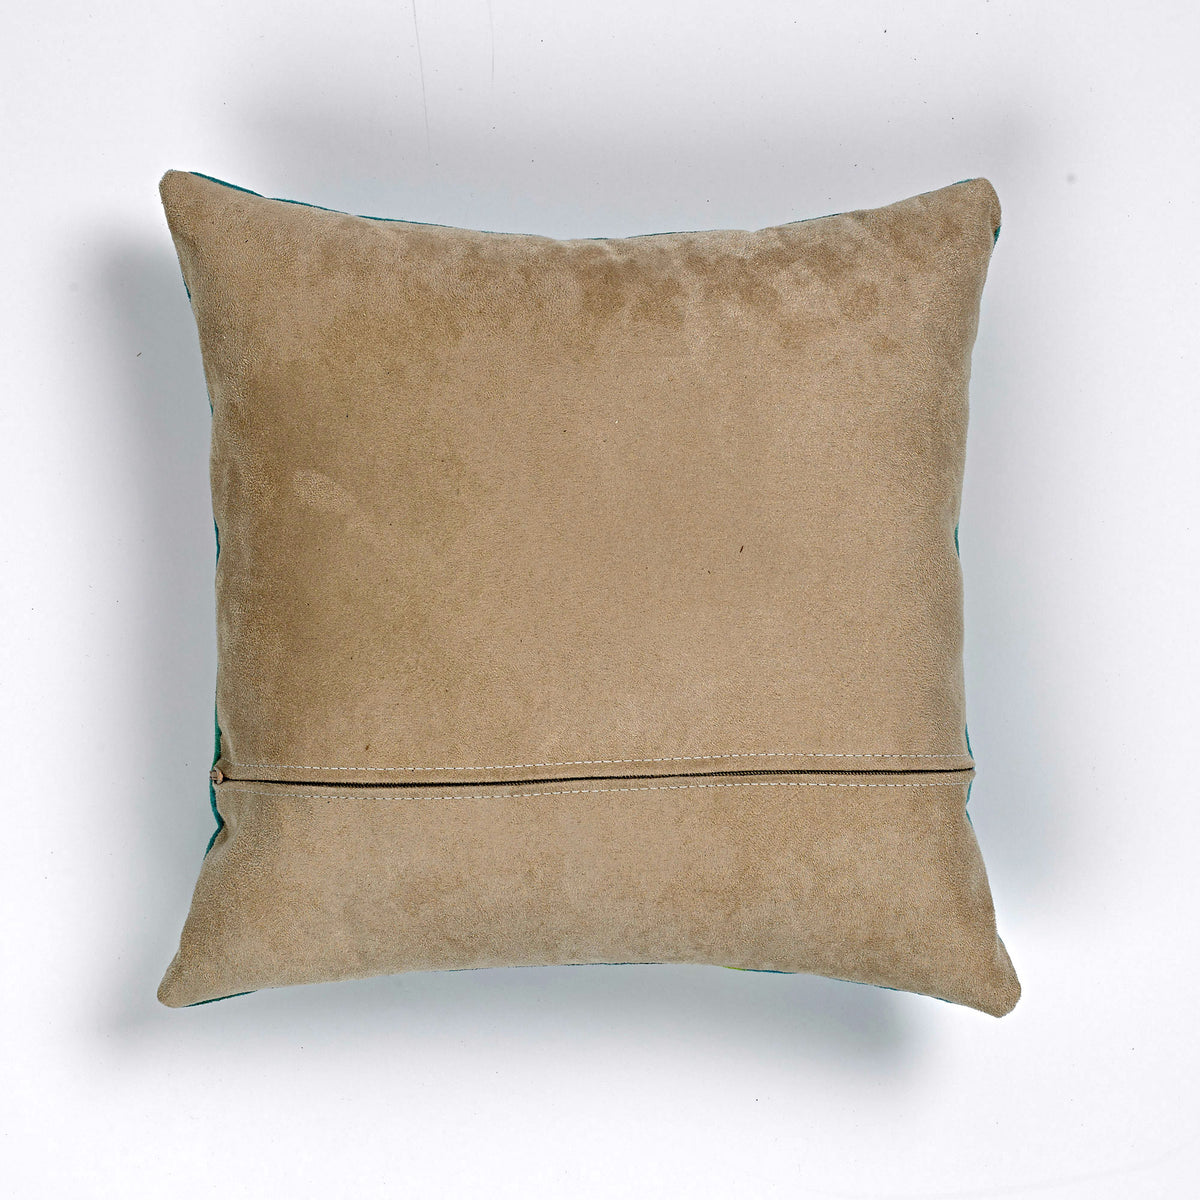 Kingfisher cushion by Fox and Boo; Faux Suede reverse